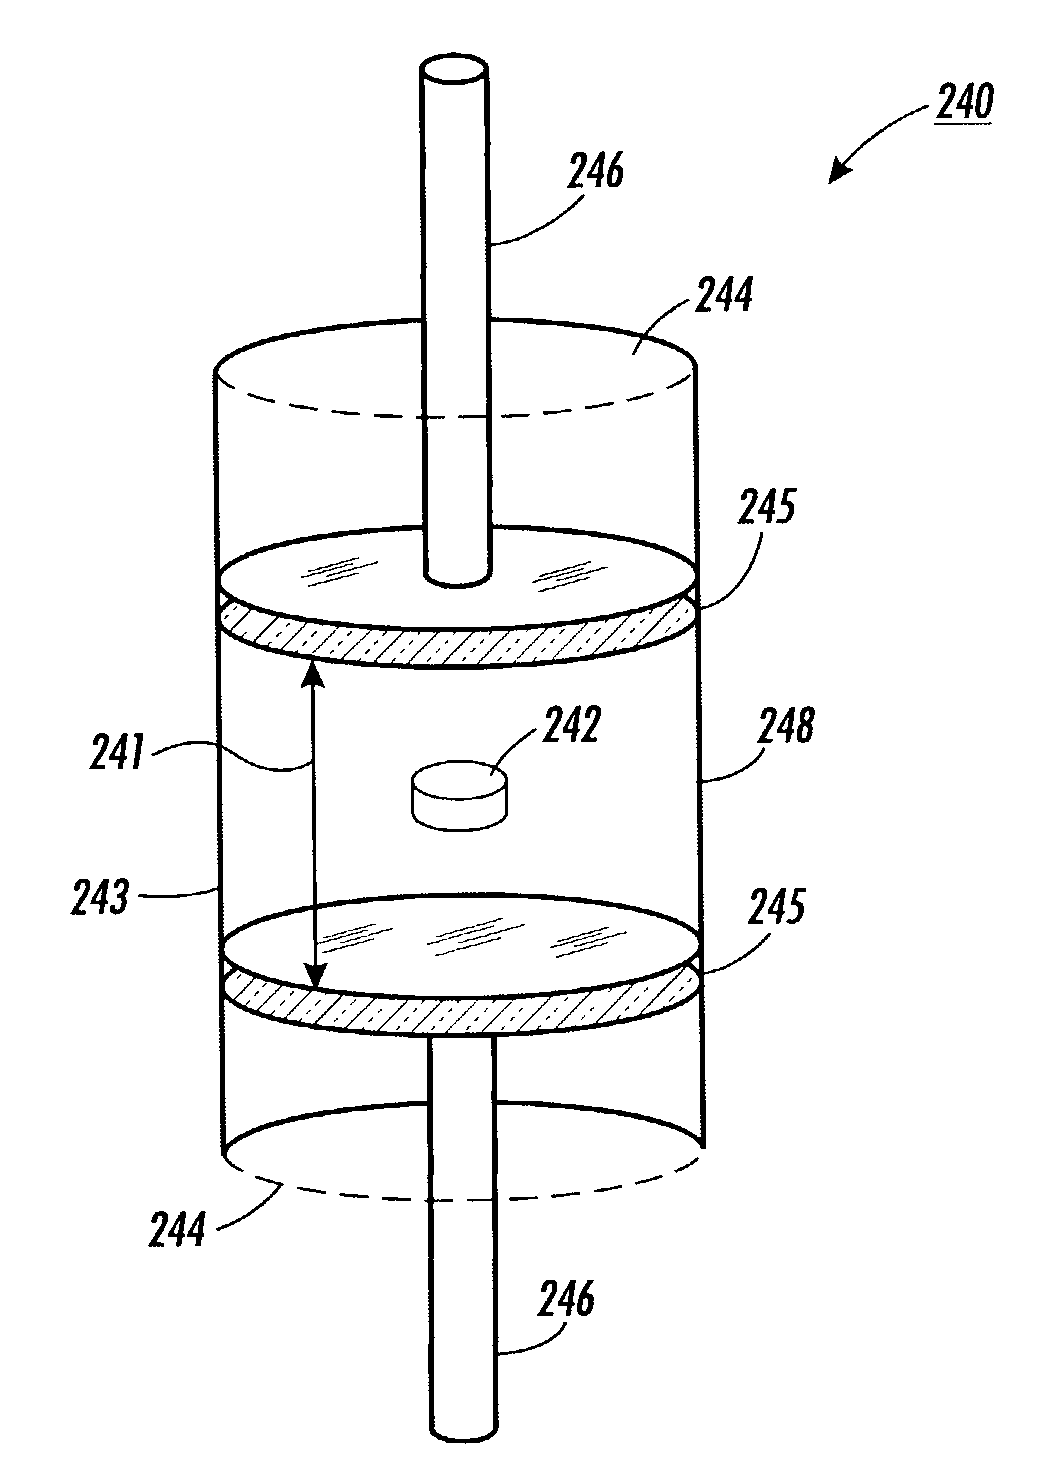 Systems and methods for producing superradiance using molecular magnets